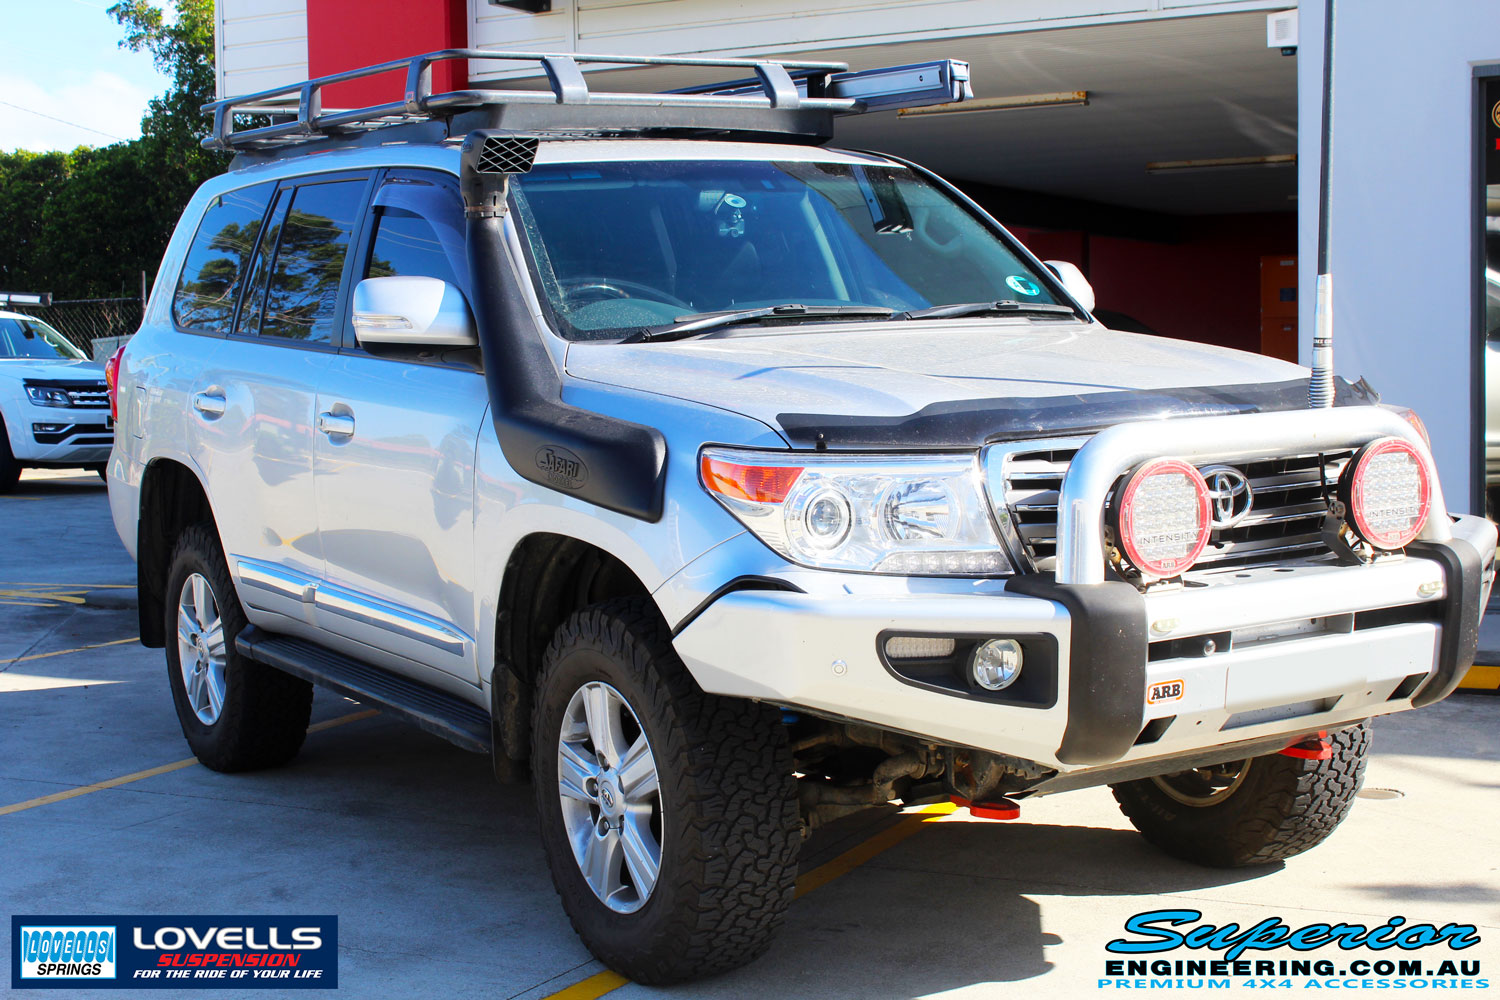 Right front side view of a Toyota 200 Series Landcruiser after fitment of a Lovells GVM Upgrade Suitable For Toyota Landcruiser 200 11/07 on 4000kg (OE 3300kg) Post Registration